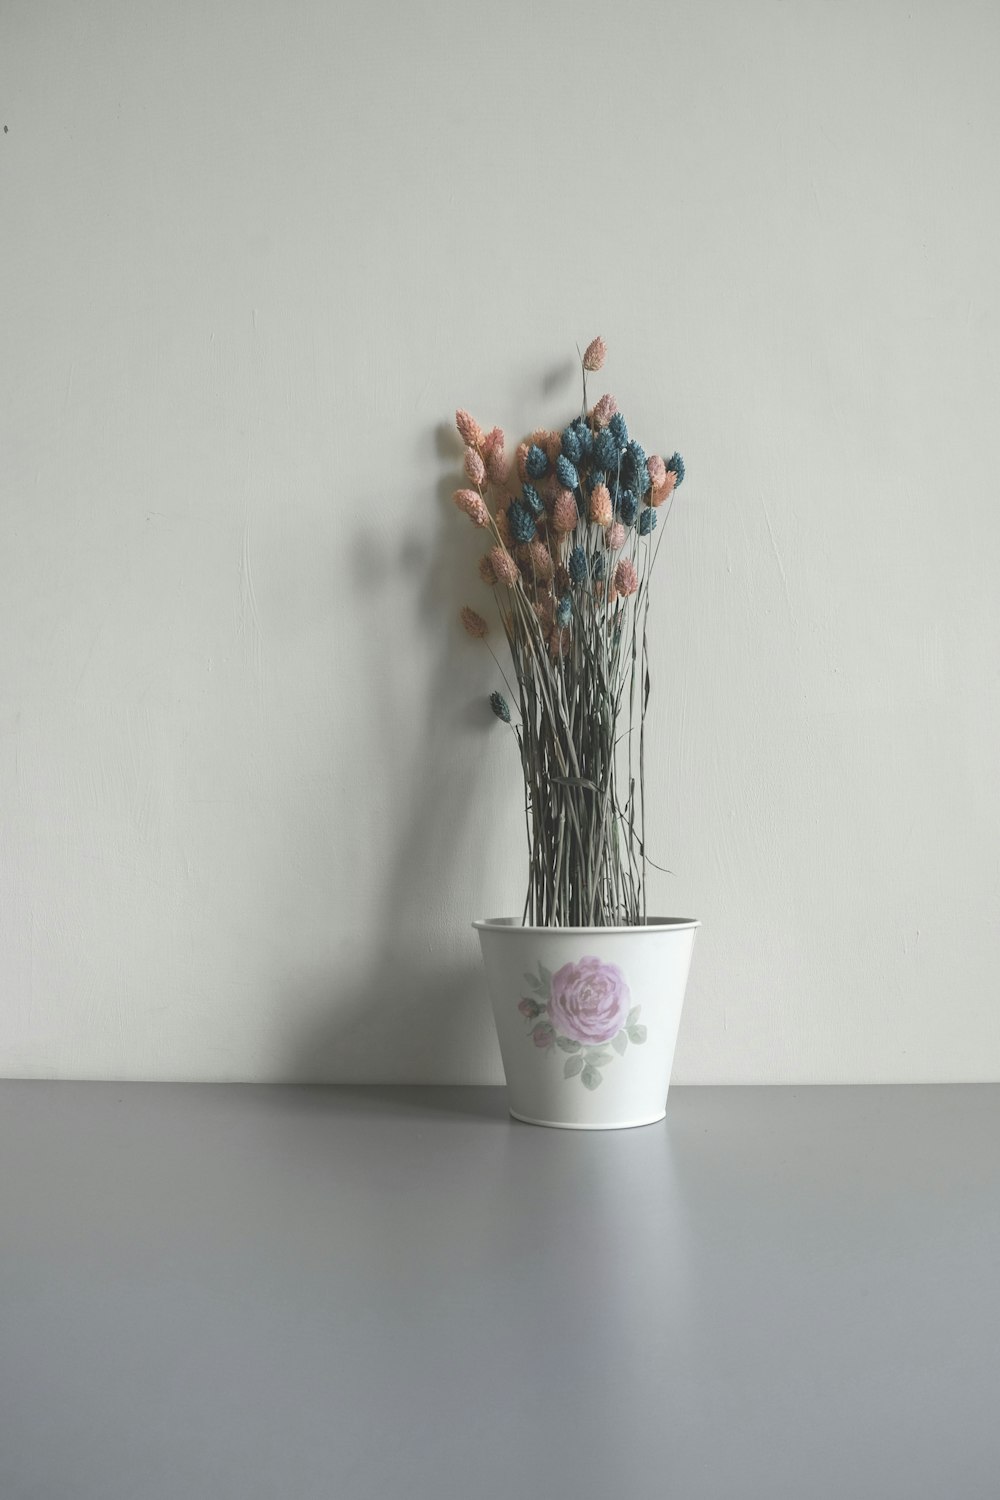 white potted pink and blue artificial flowers near wall